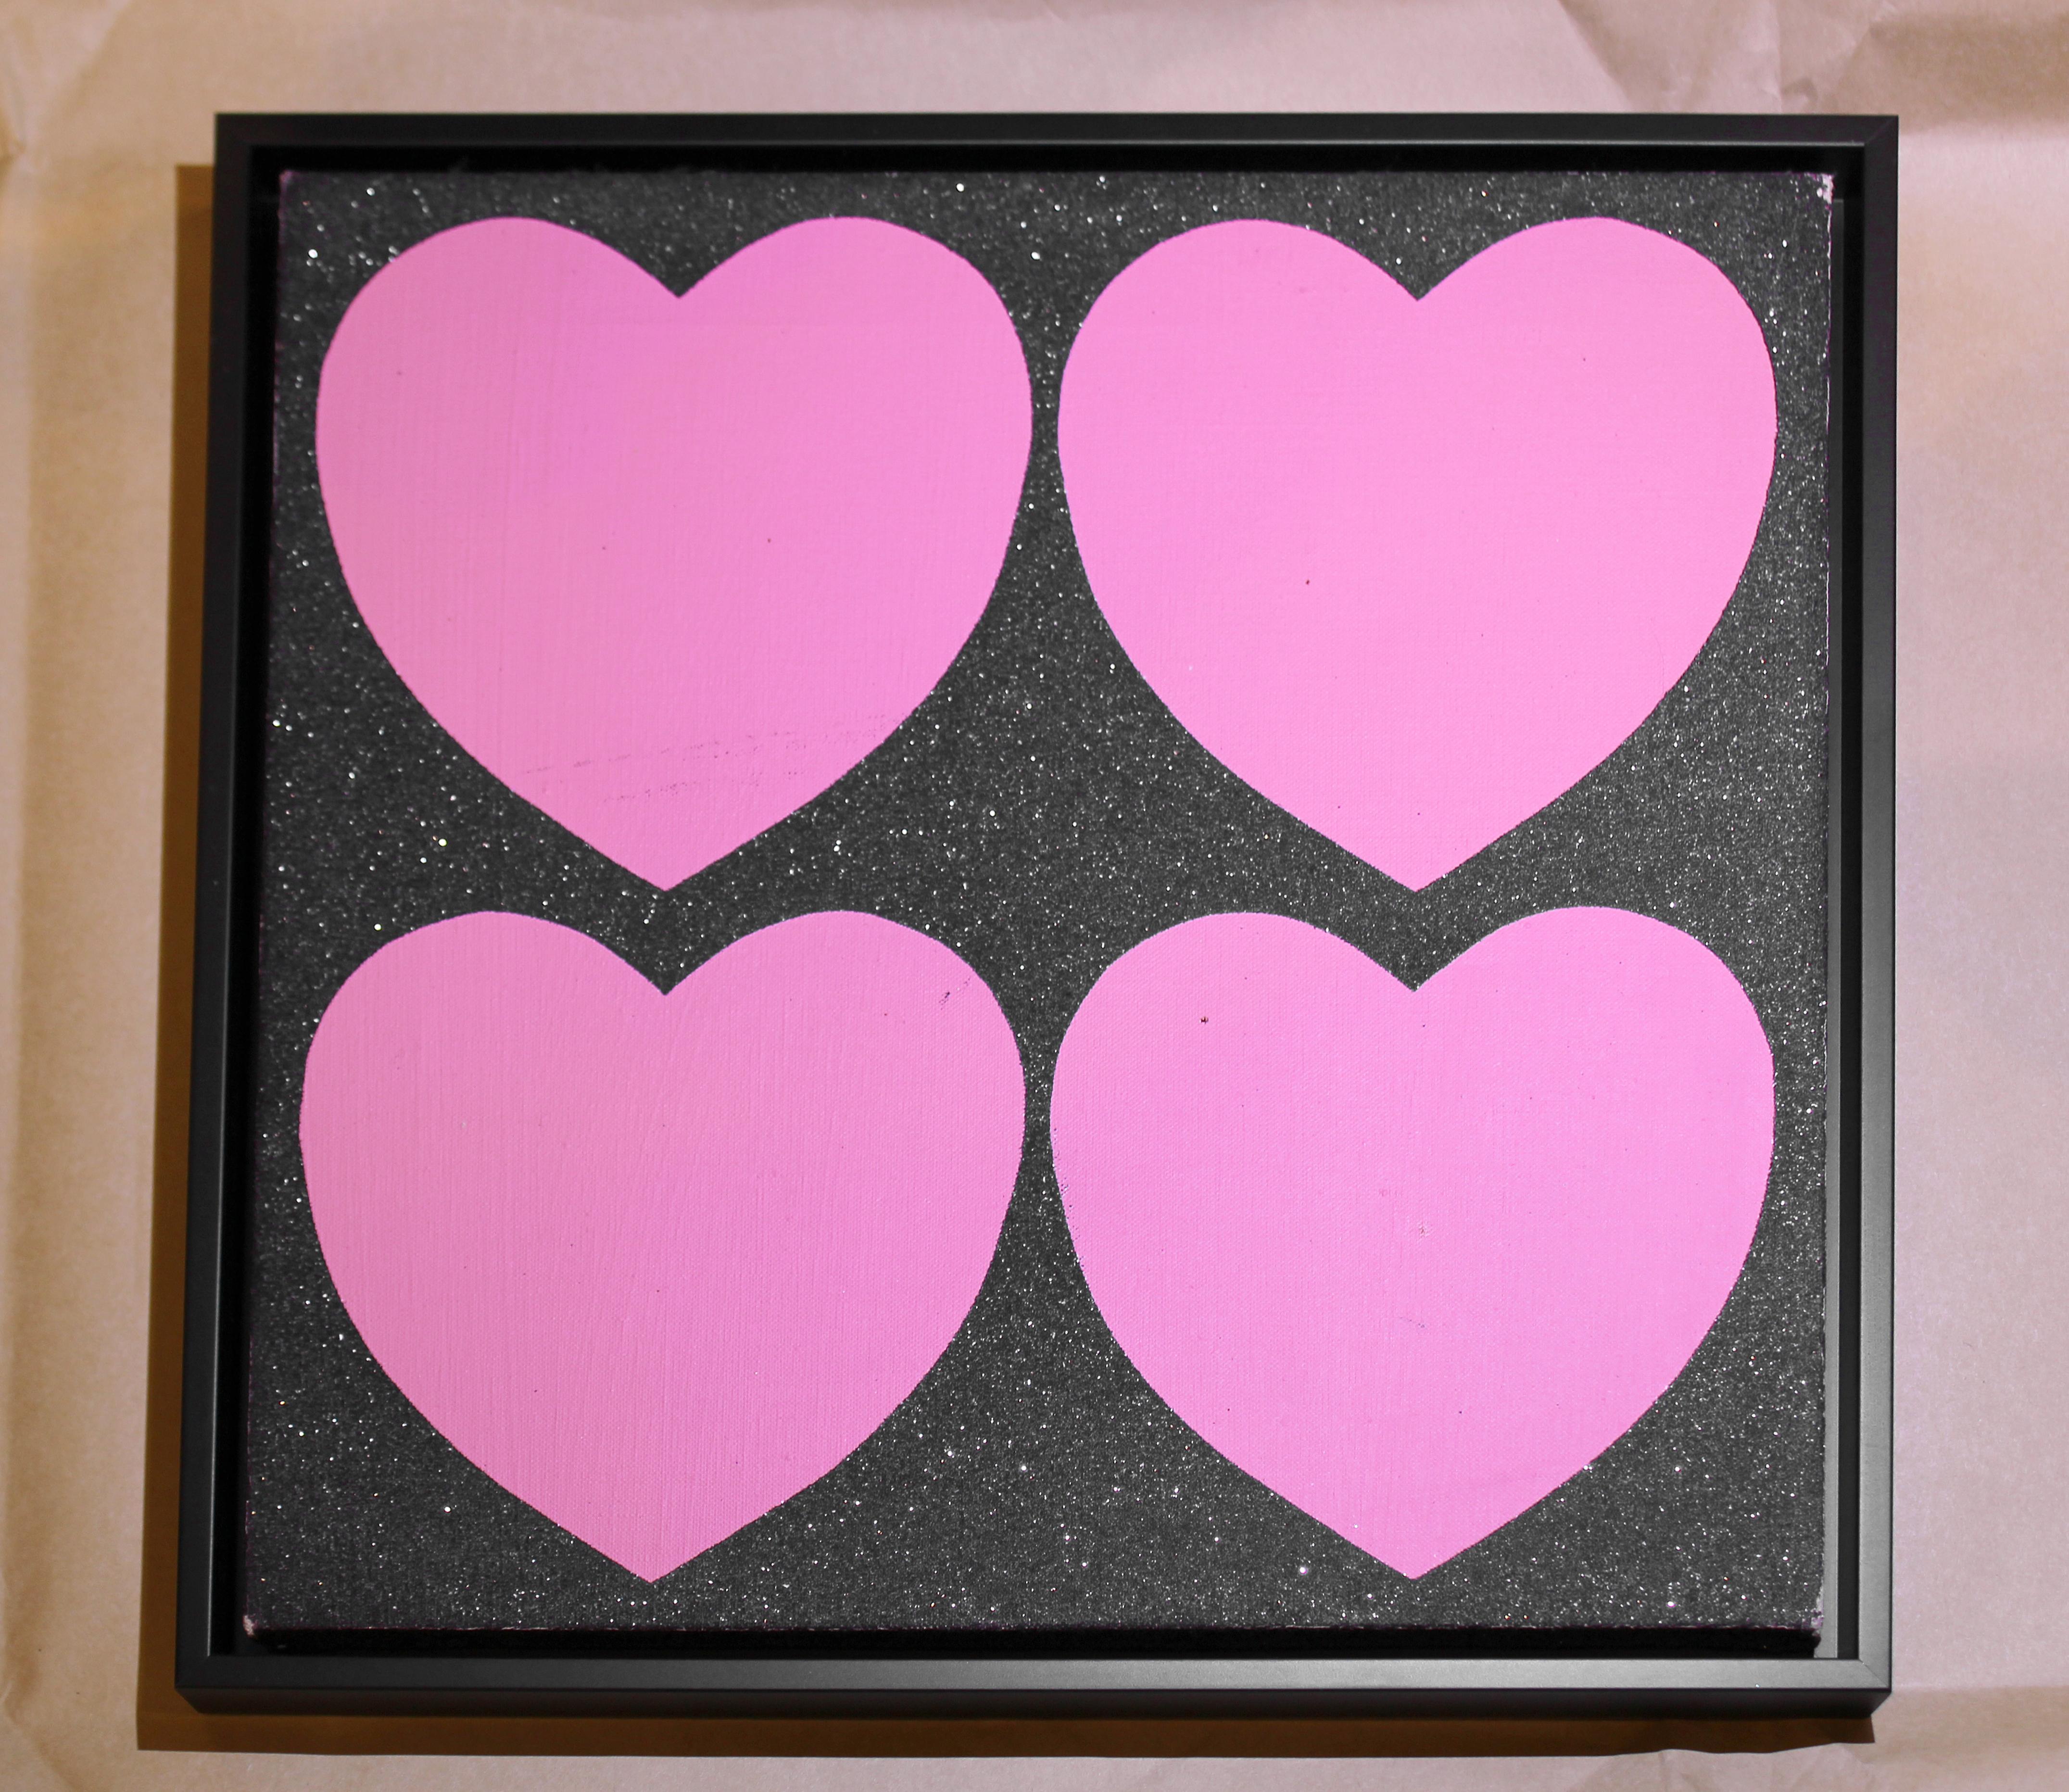 Unique silkscreen painting by Andy Warhol.

Four Hearts, is a painting Warhol created in 1986, featuring silkscreen enamel and diamond dust on canvas.  This work is signed and dedicated on the reverse by Andy Warhol.  It is believed that Warhols